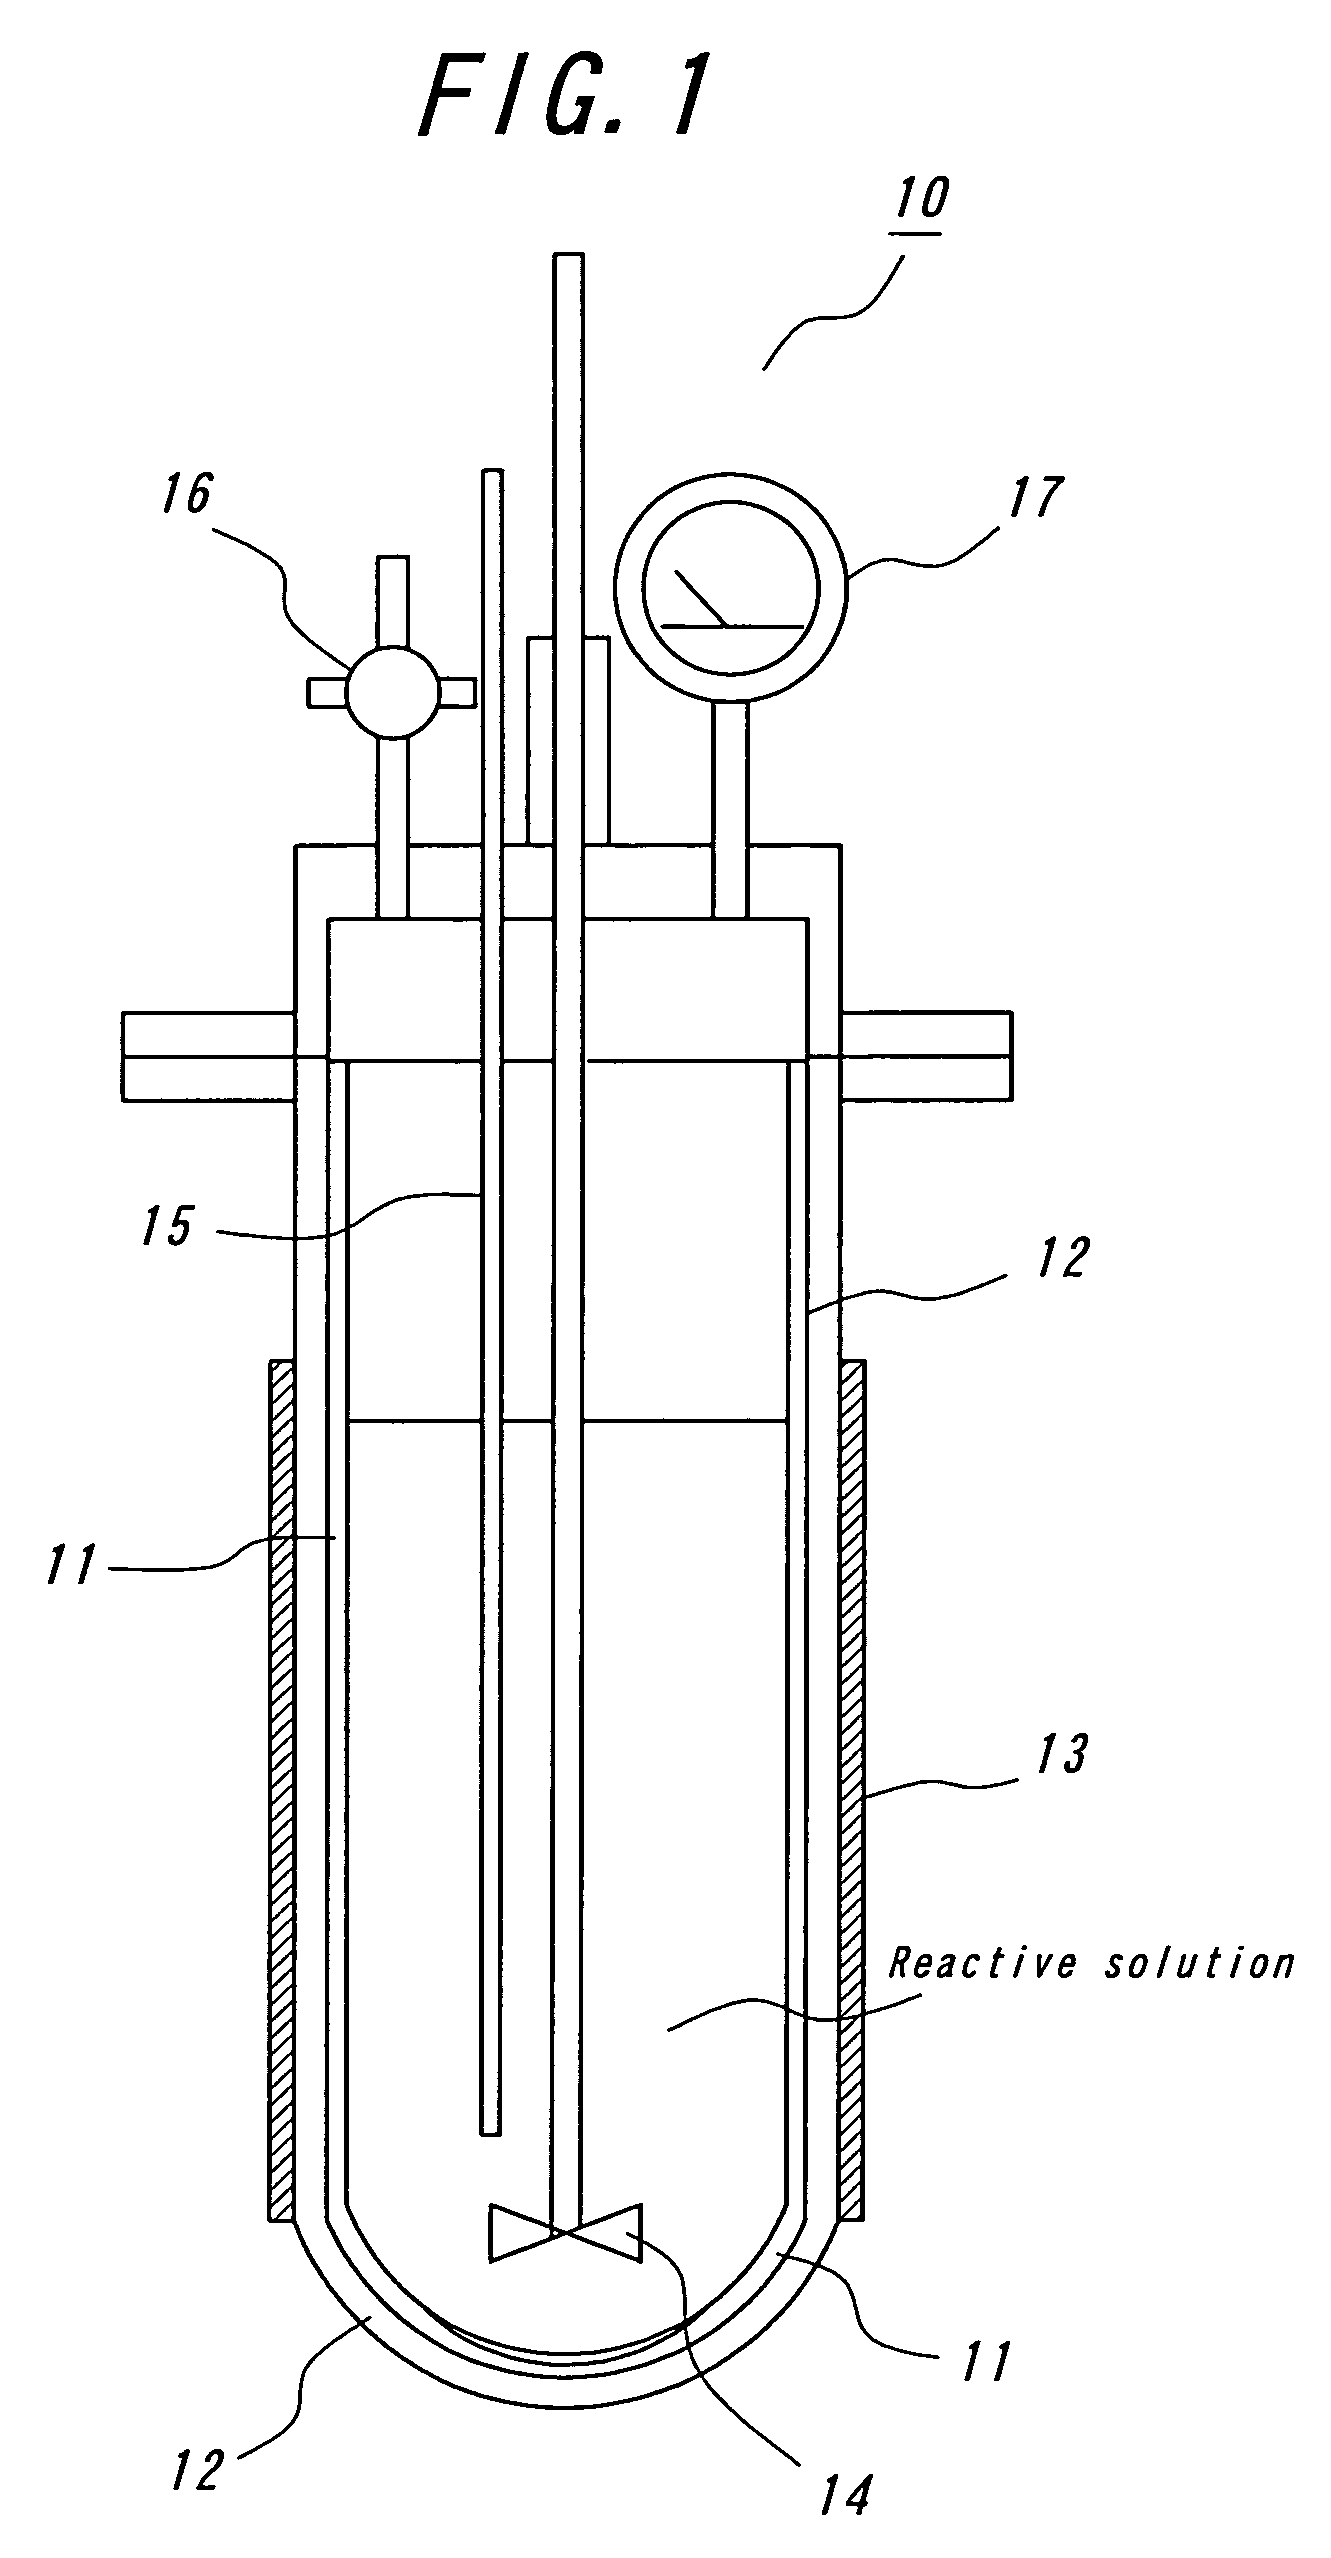 Method for producing a carbon layer-covering transition metallic nano-structure, method for producing a carbon layer-covering transition metallic nano-structure pattern, carbon layer-covering transition metallic nano-structure, and carbon layer-covering transition metallic nano-structure pattern